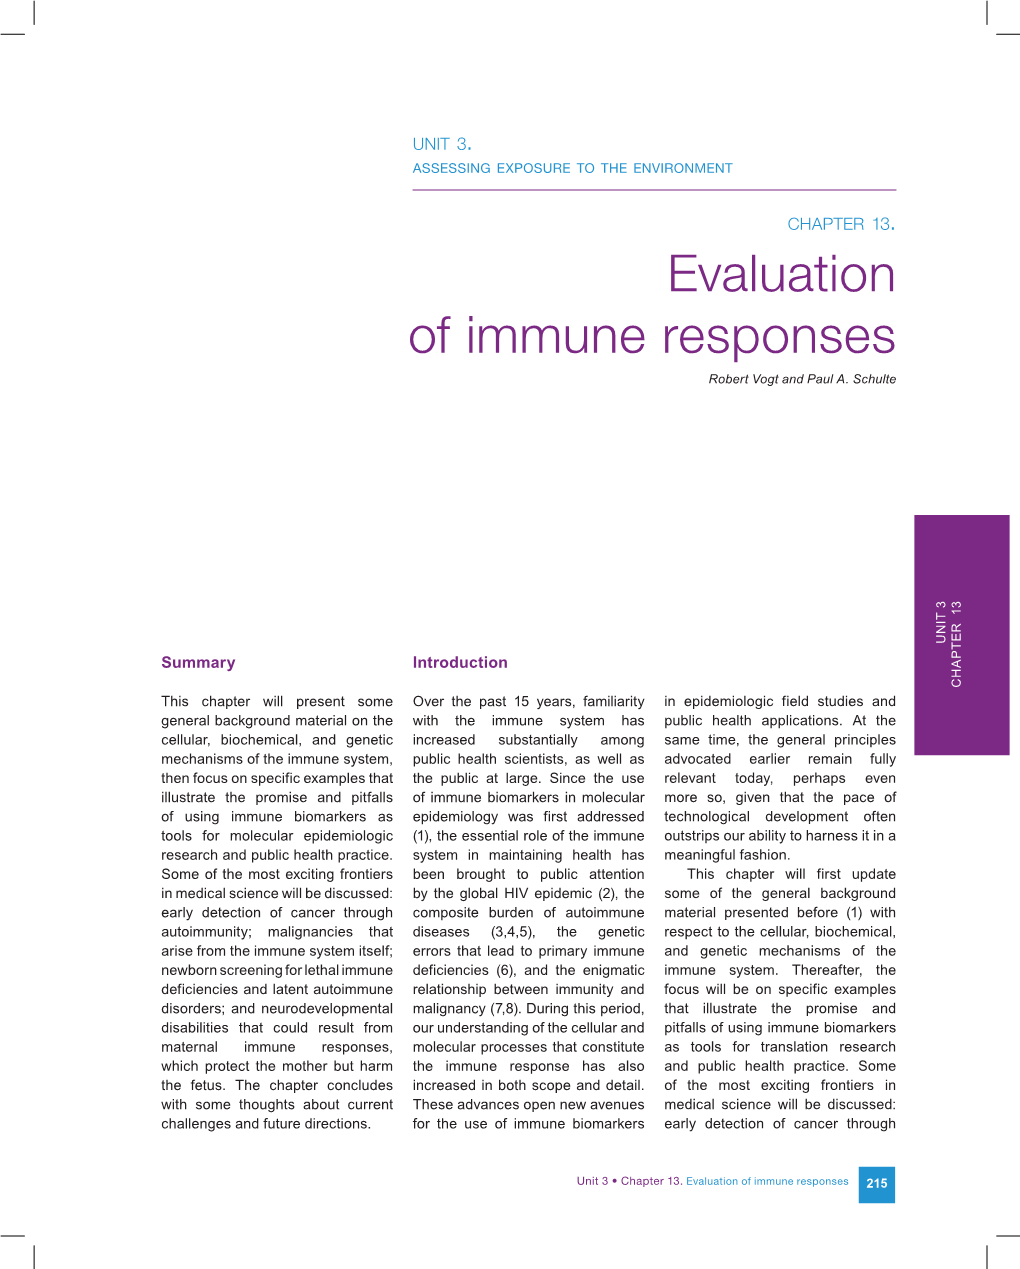 Evaluation of Immune Responses Robert Vogt and Paul A